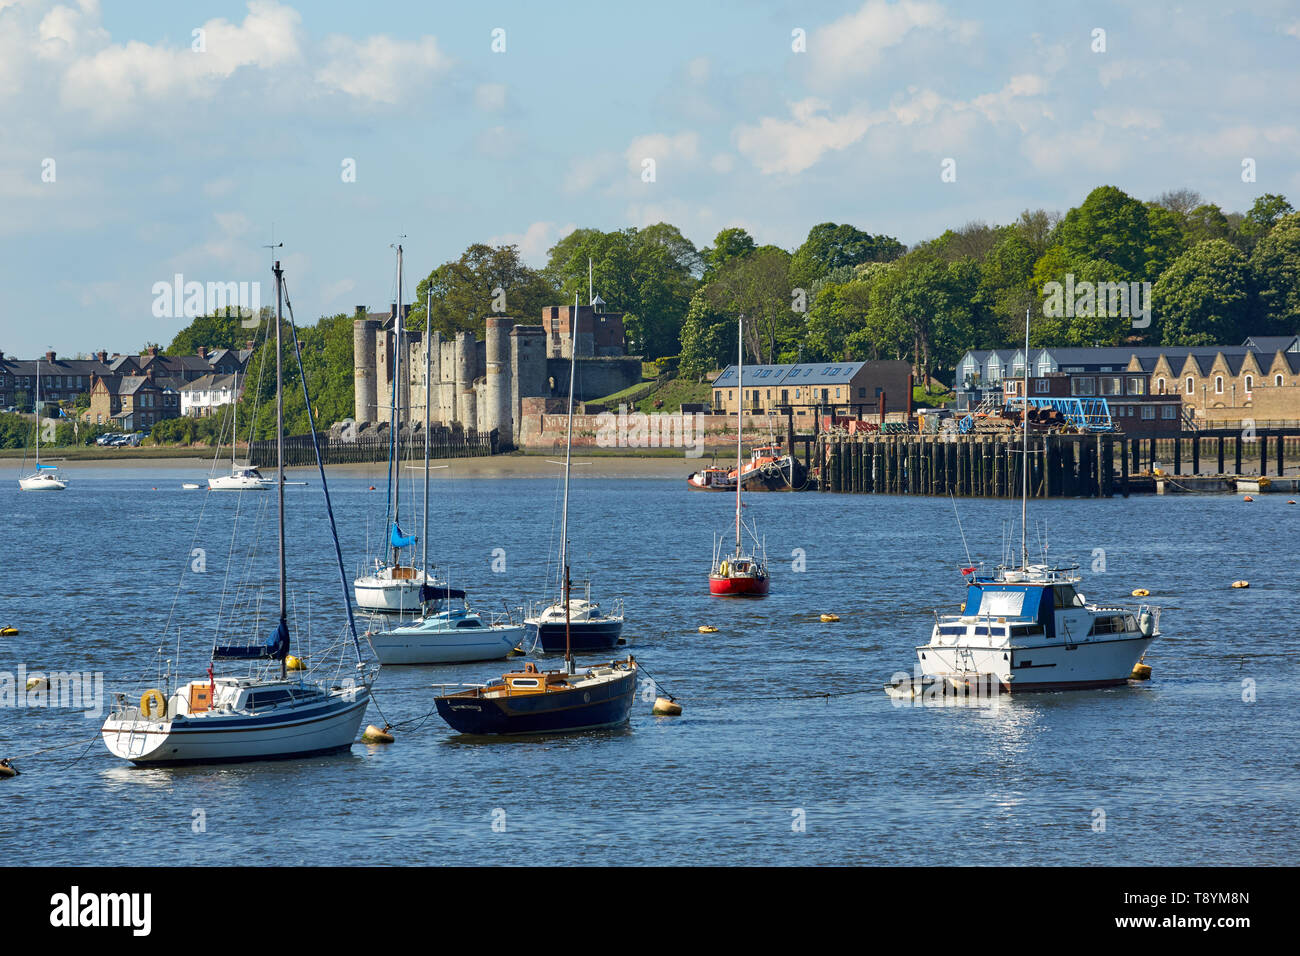 Yachts at moorings on the River Medway at Lower Upnor, Kent,UK. Showing Upnor Castle in the distance. Stock Photo